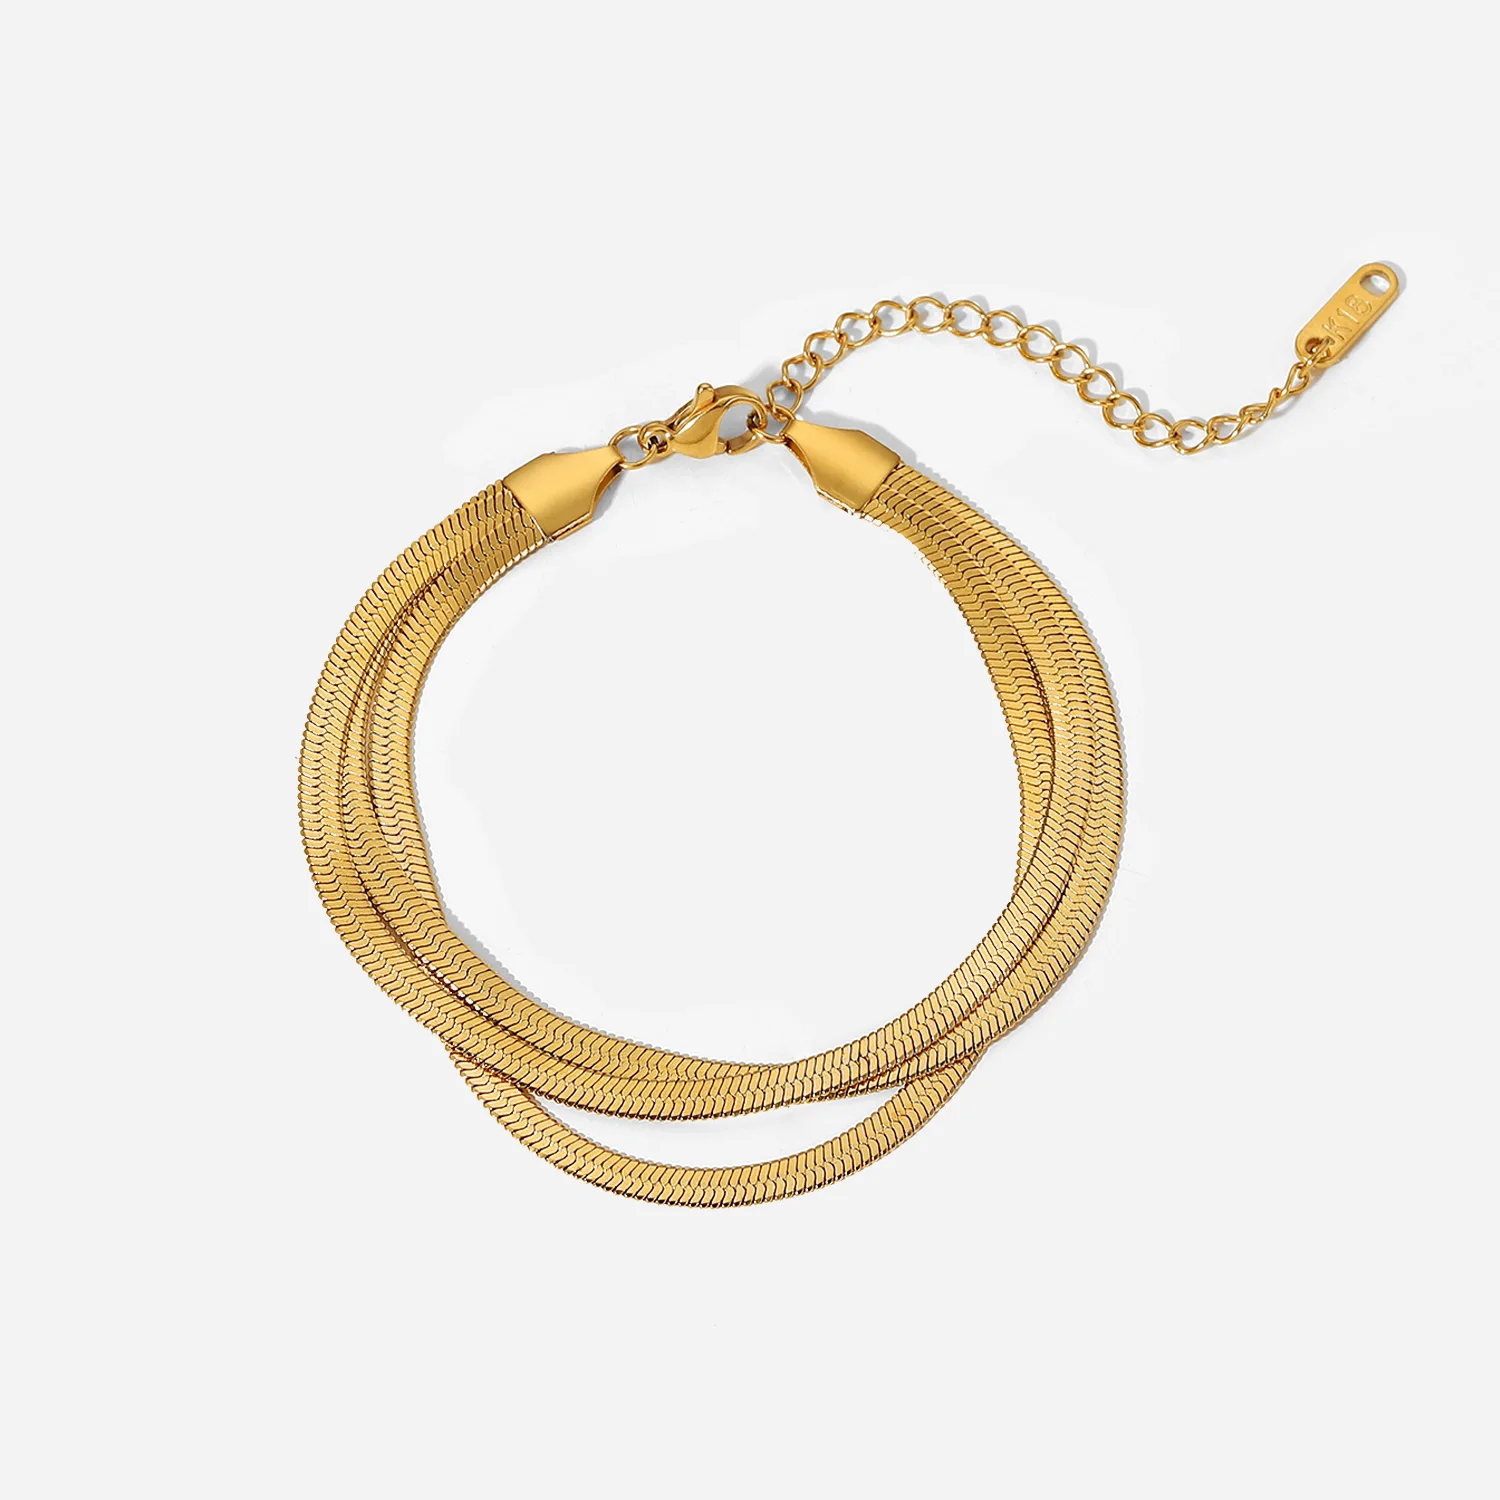 

Three Layer Dainty Flat Snake Chain Wrist Jewelry 18K Gold Plated Stackable Stainless Steel Bone Chain Bracelets For Women